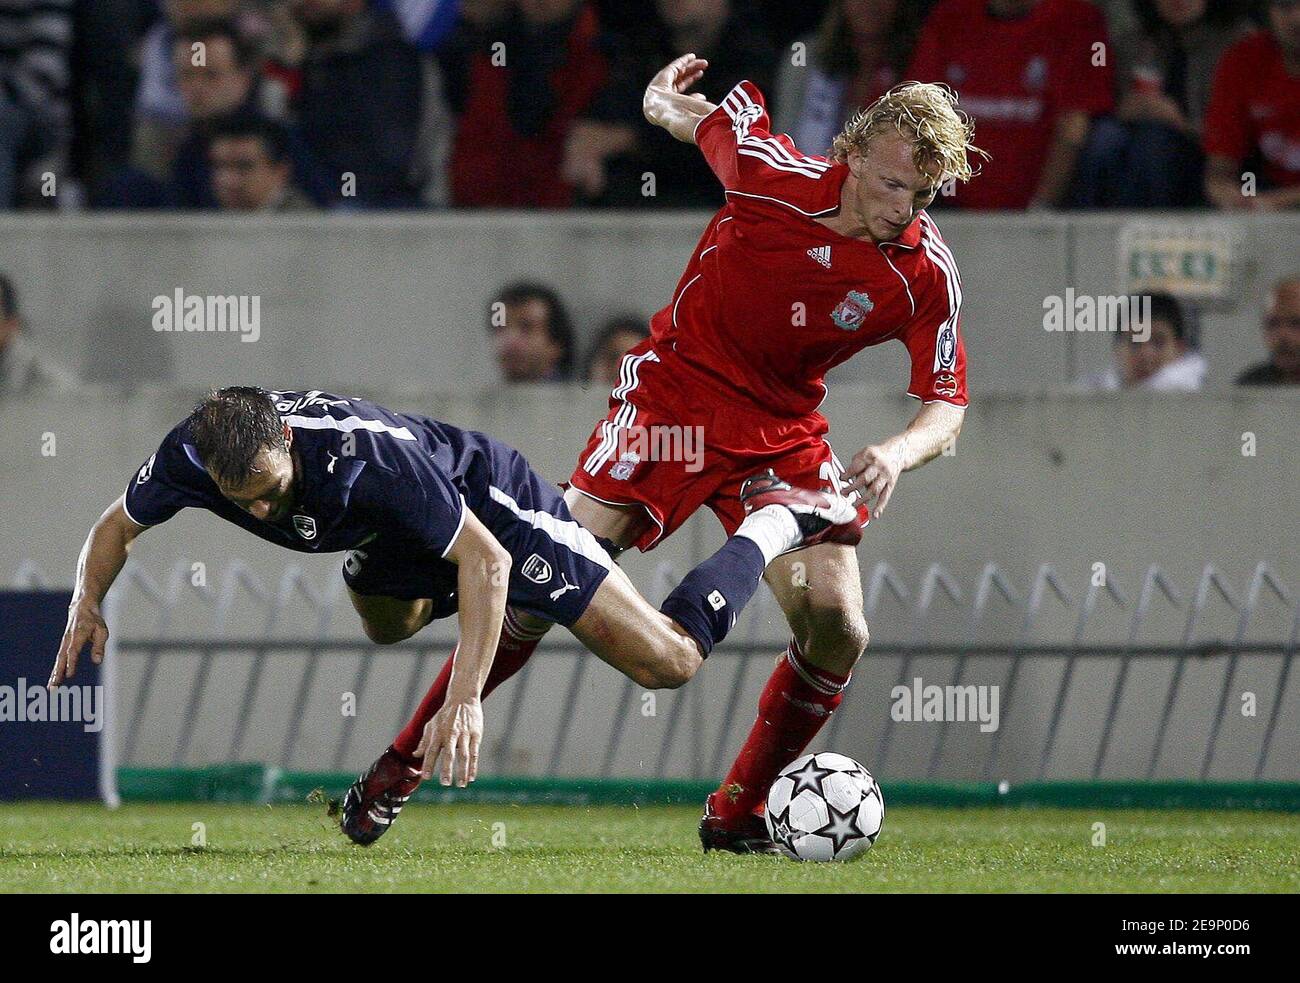 Liverpool's Dirk Kuyt tackles Bordeaux' Franck Jurietti during the UEFA Champions League, Group C, Girondins de Bordeaux vs Liverpool FC at the Stade Chaban-Delmas in Bordeaux, France on October 18, 2006. Liverpool won 1-0. Photo by Christian Liewig/ABACAPRESS.COM Stock Photo